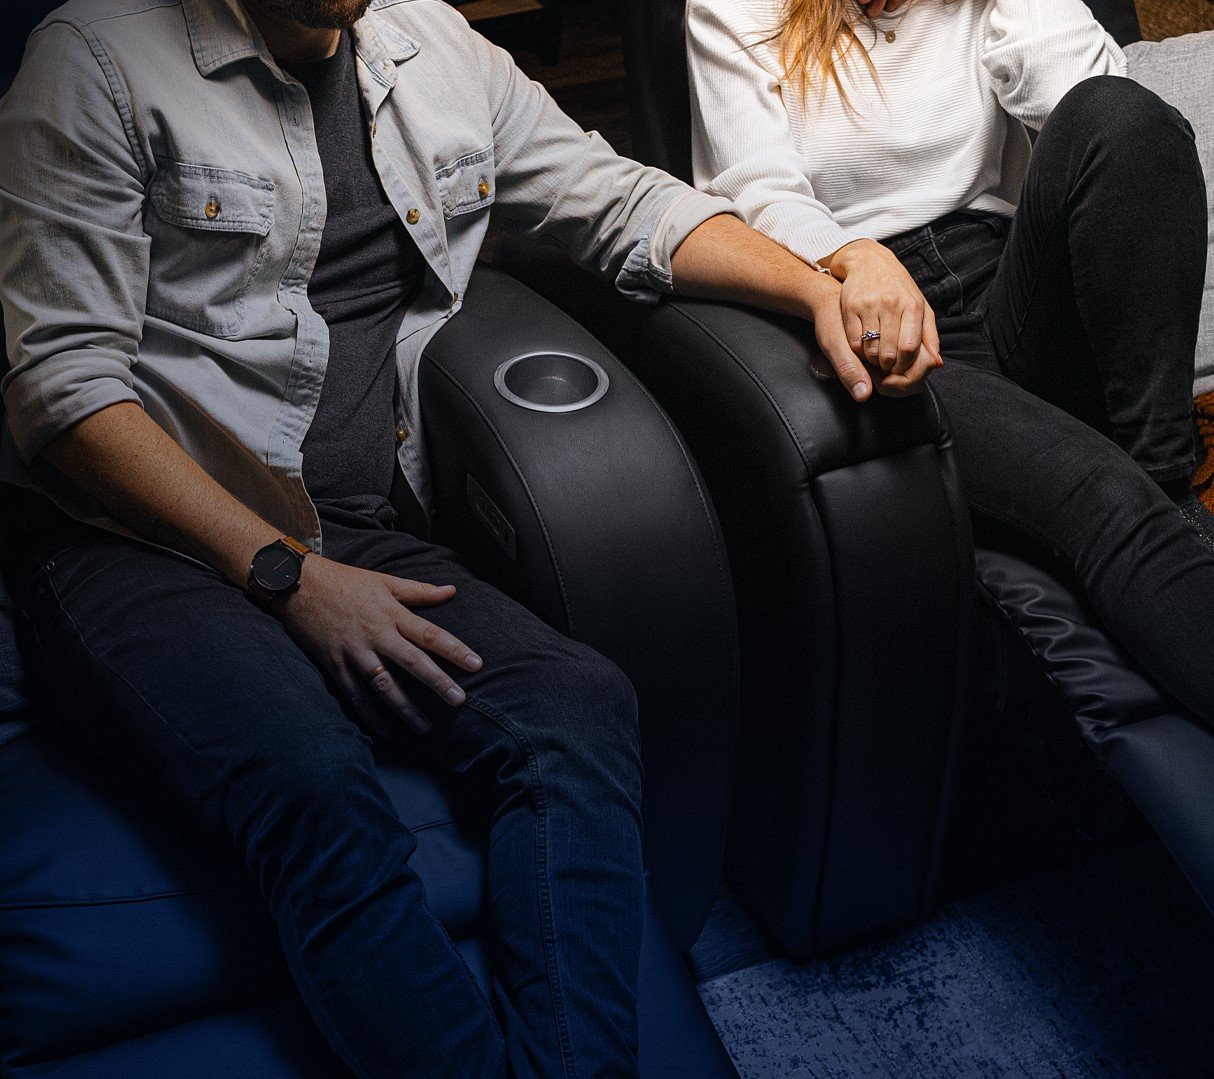 Couple enjoying a movie at home with D-BOX haptic recliner seats